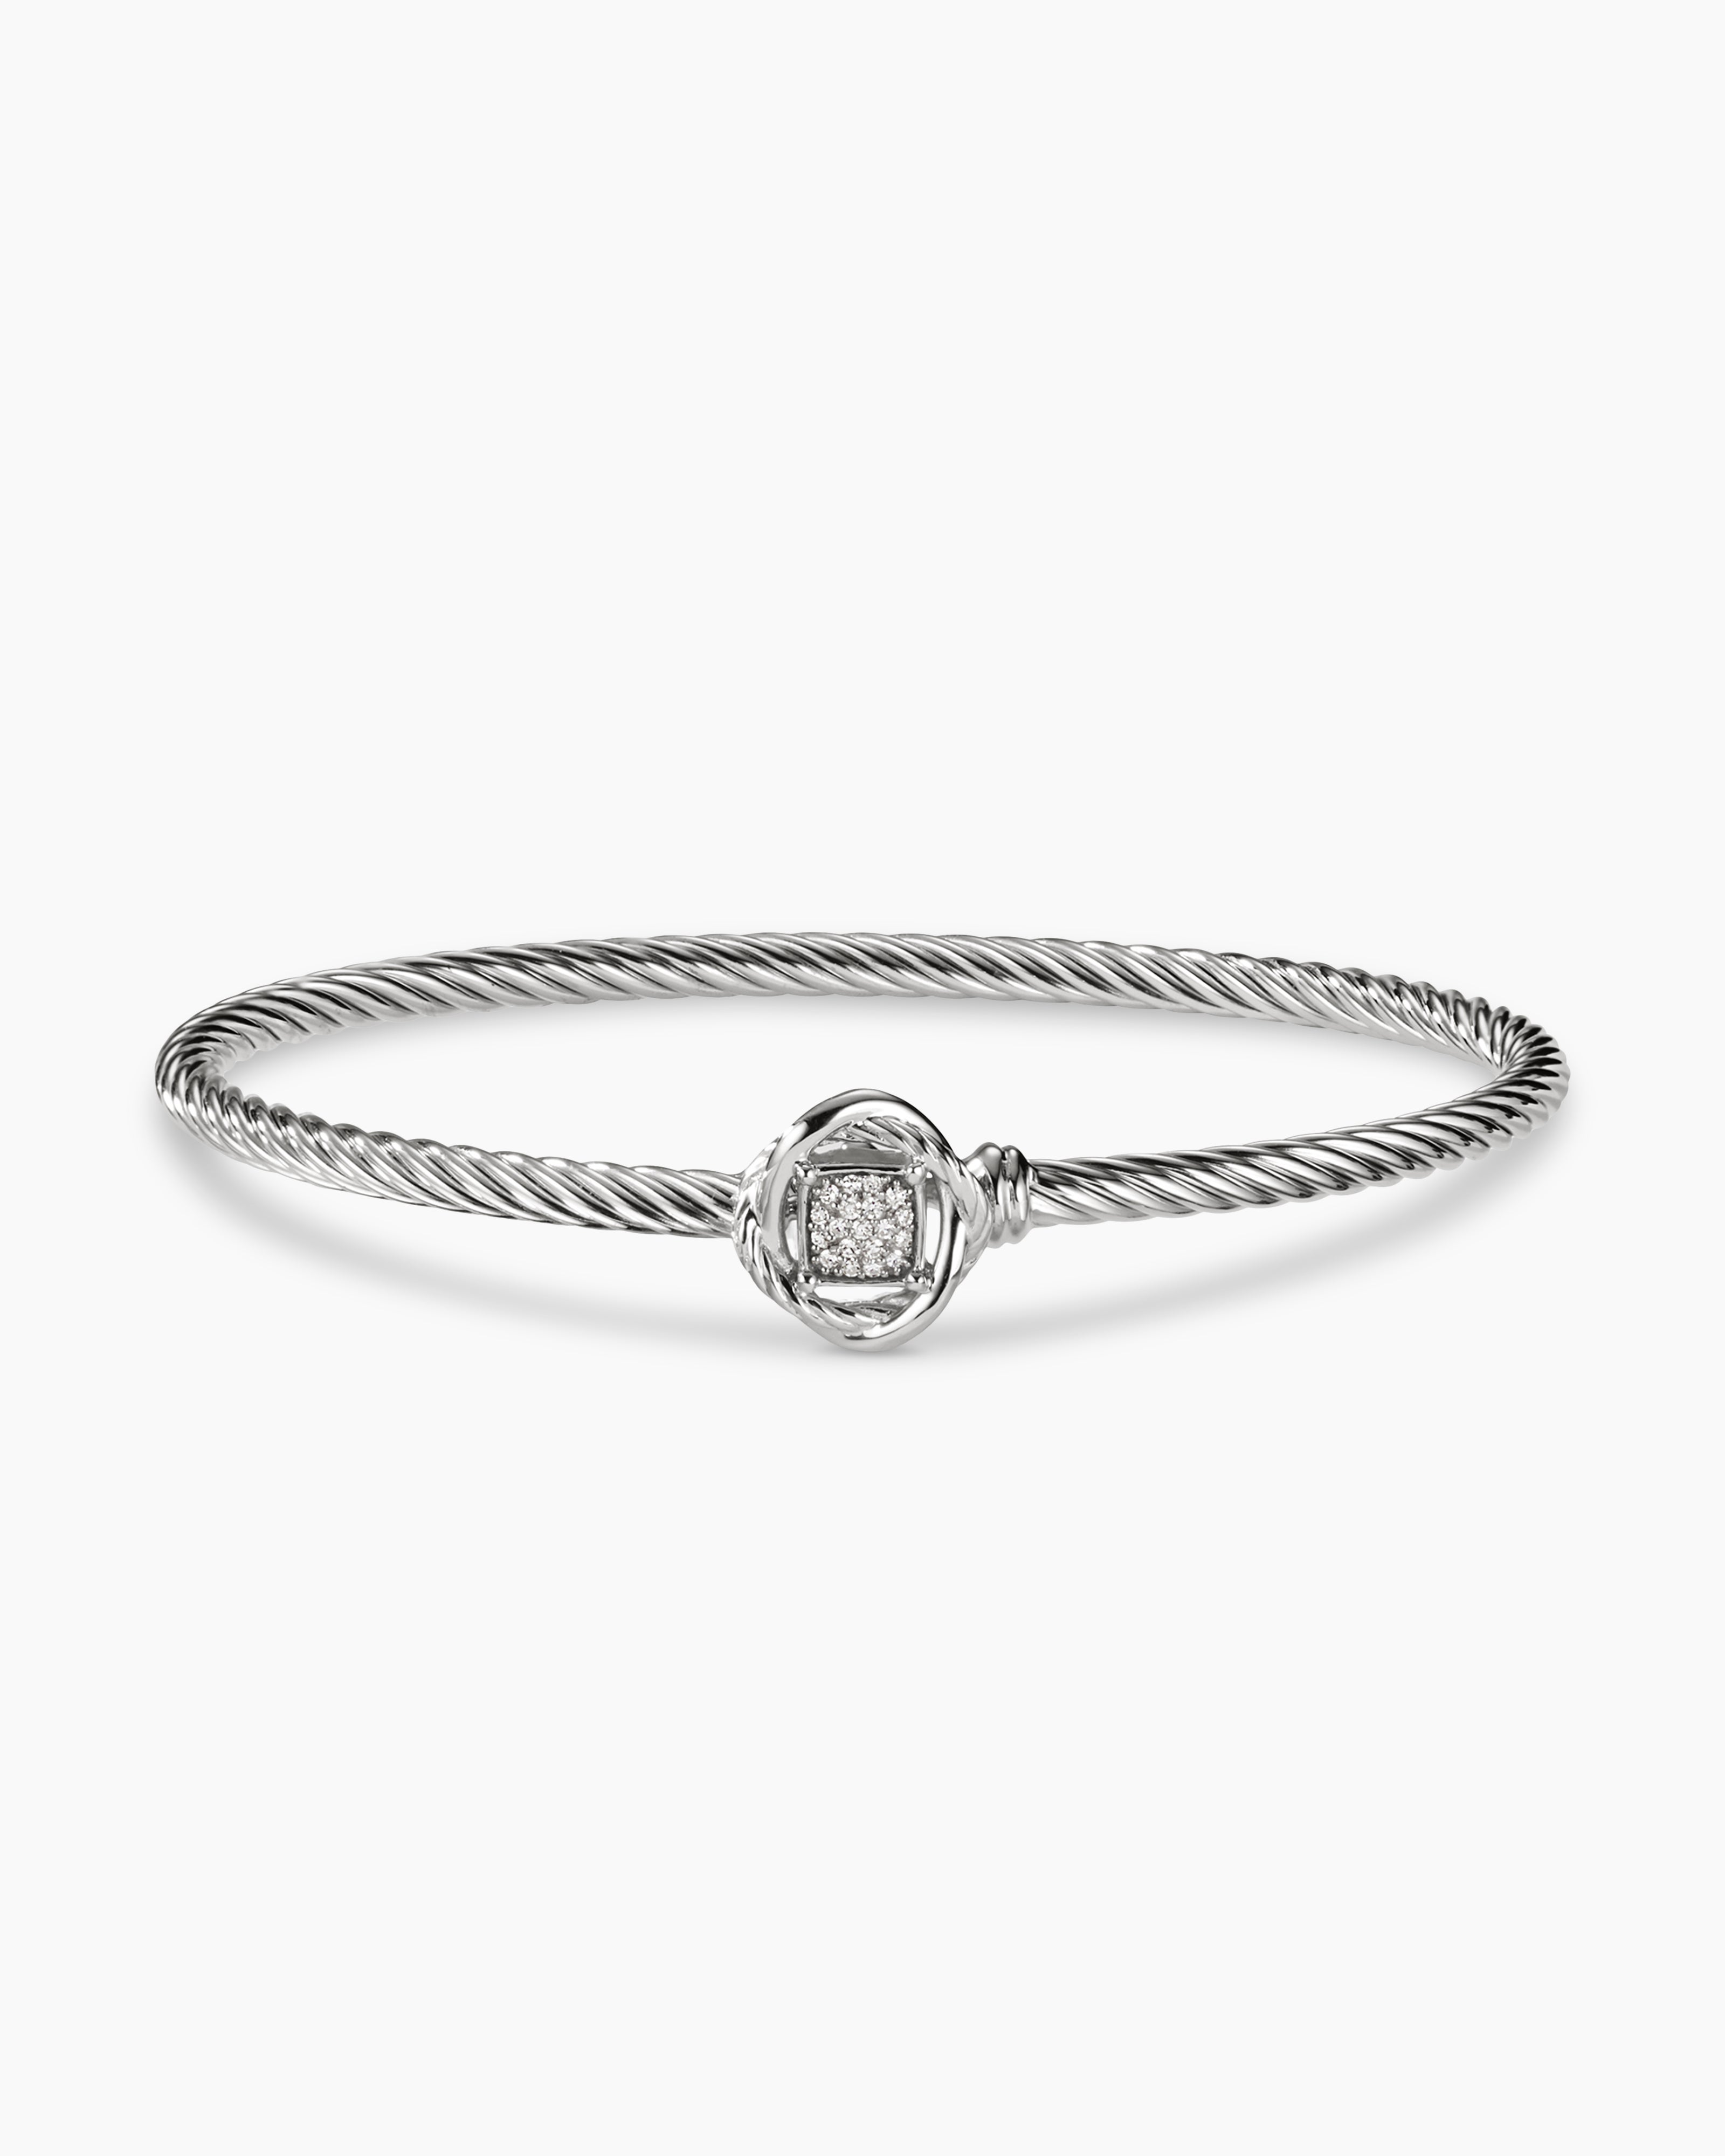 Which Hand Should You Wear Your Silver Bracelets On? | Silver Chic